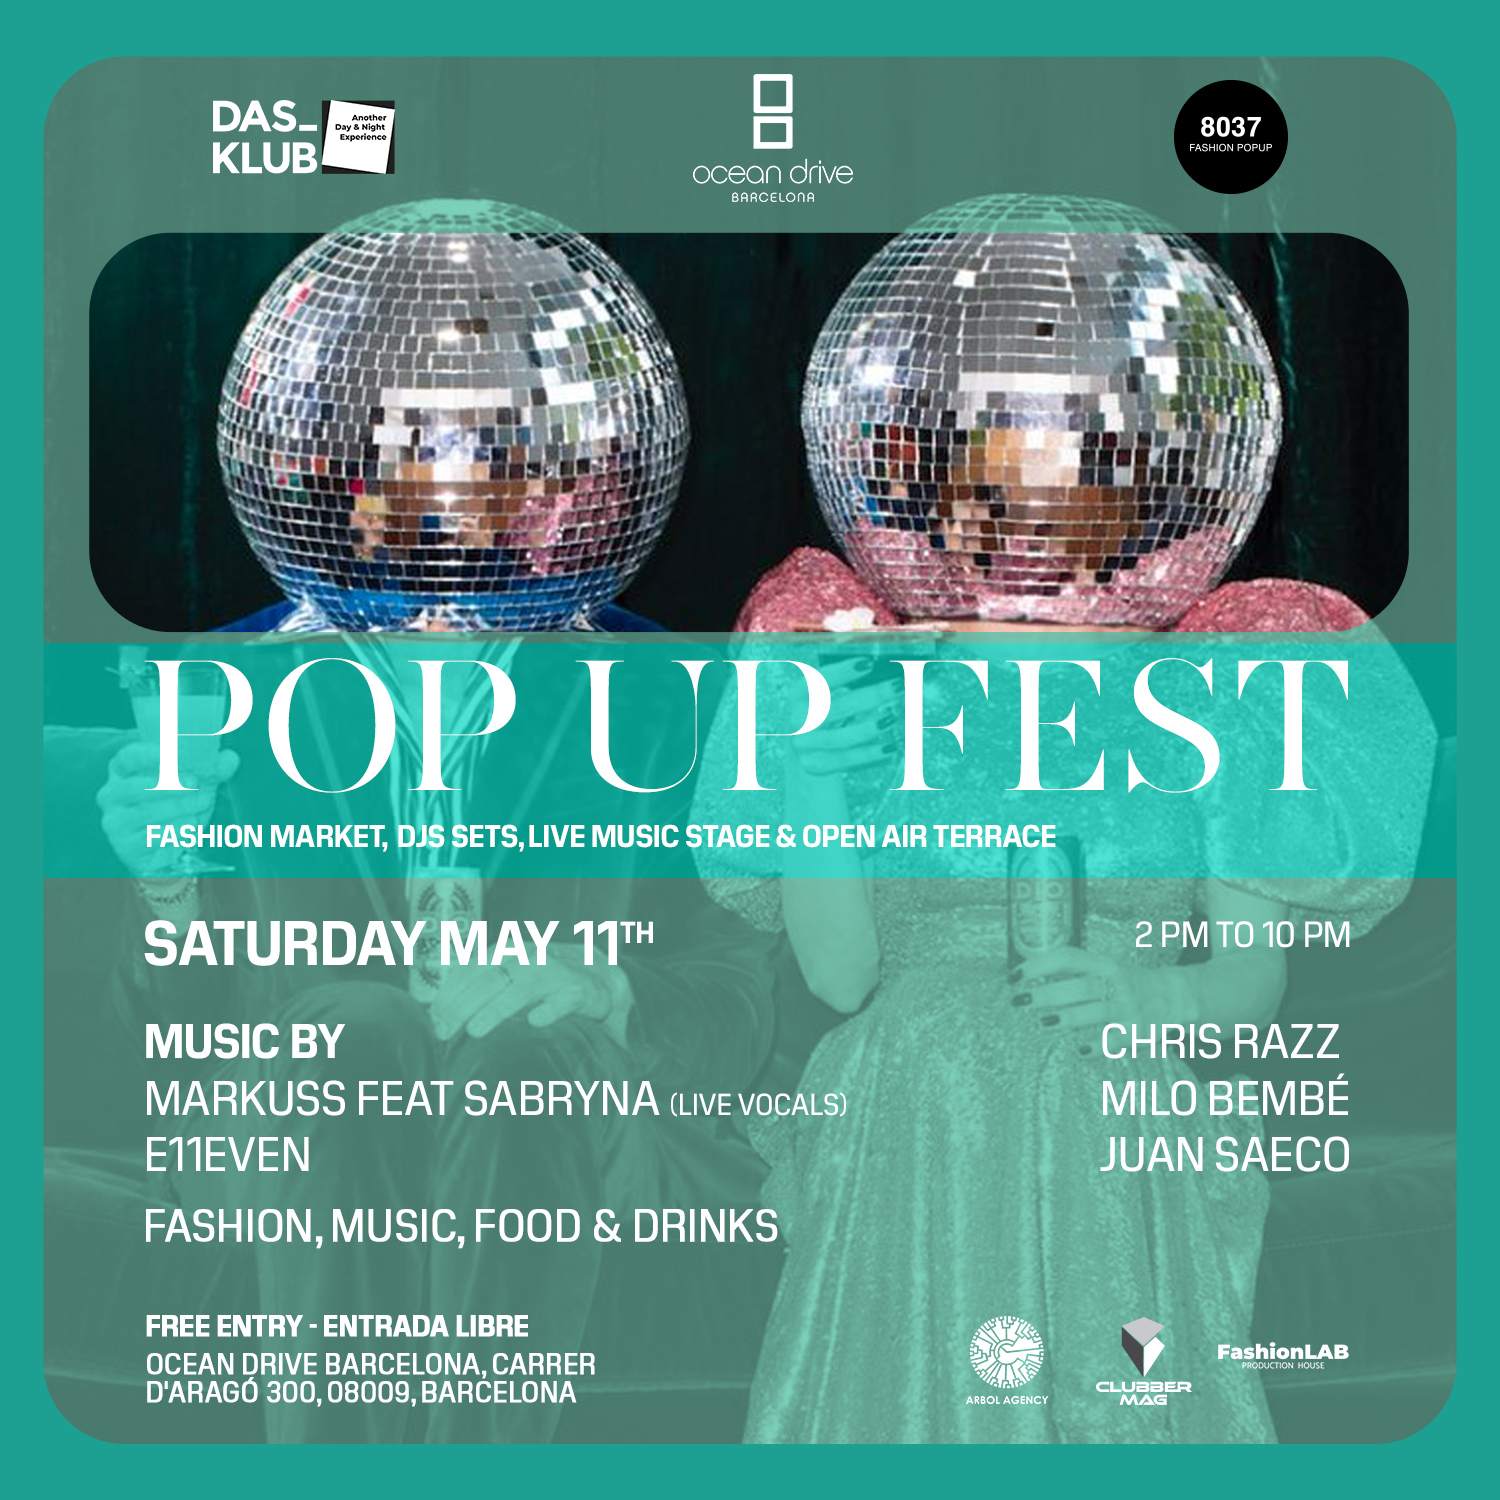 DAS-KLUB pres POP UP FEST Fashion and Music / Open Air Terrace & Music Stage - フライヤー裏